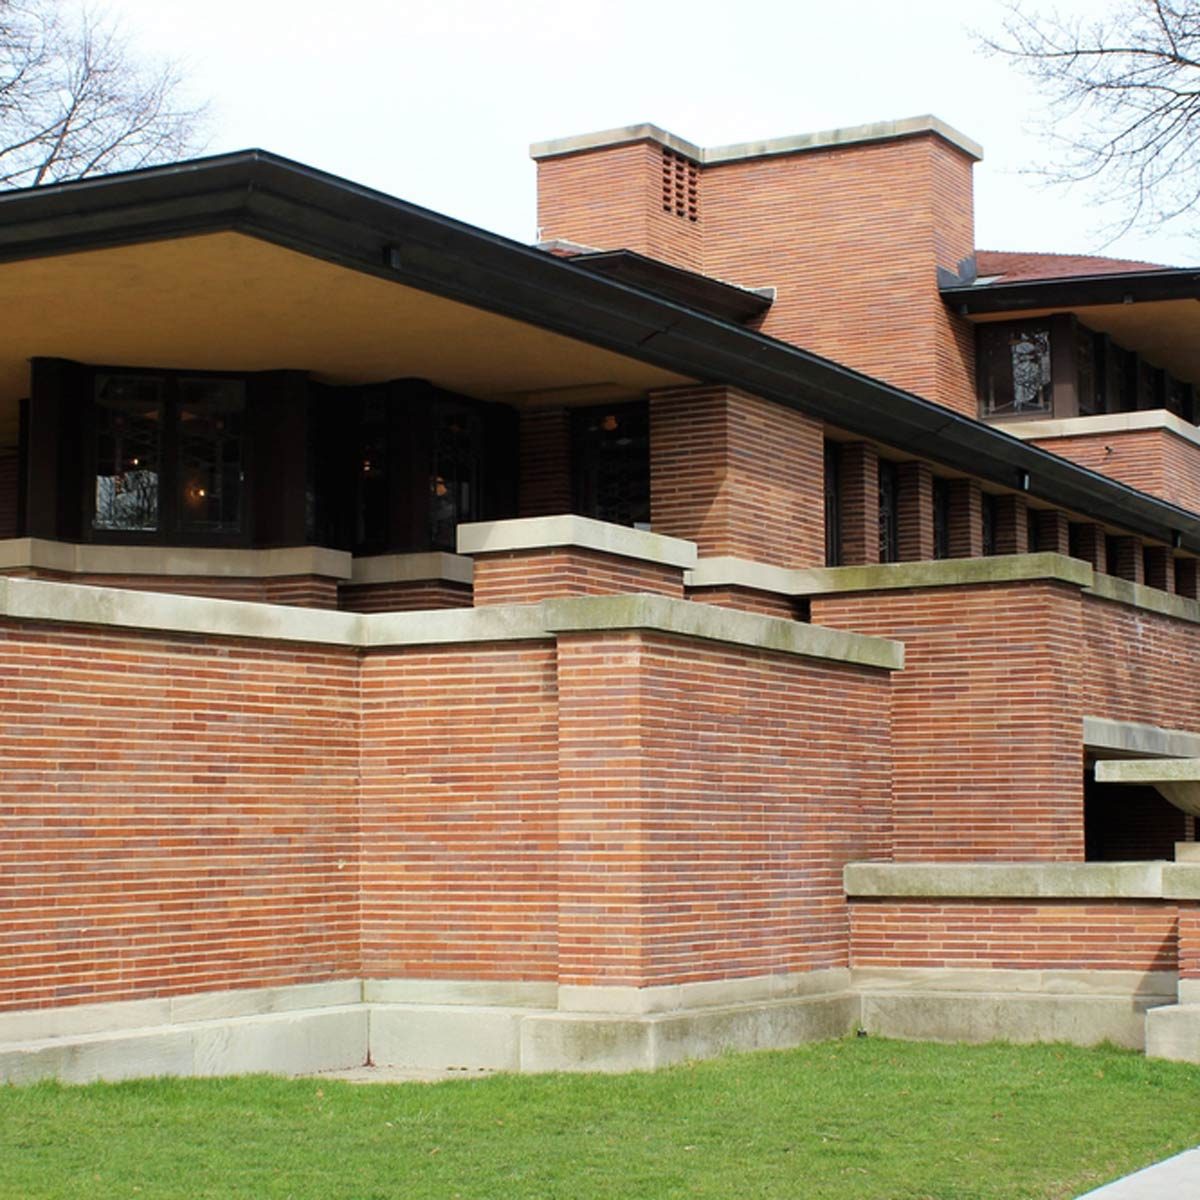 10 Favorite Frank Lloyd Wright Houses You Need to See